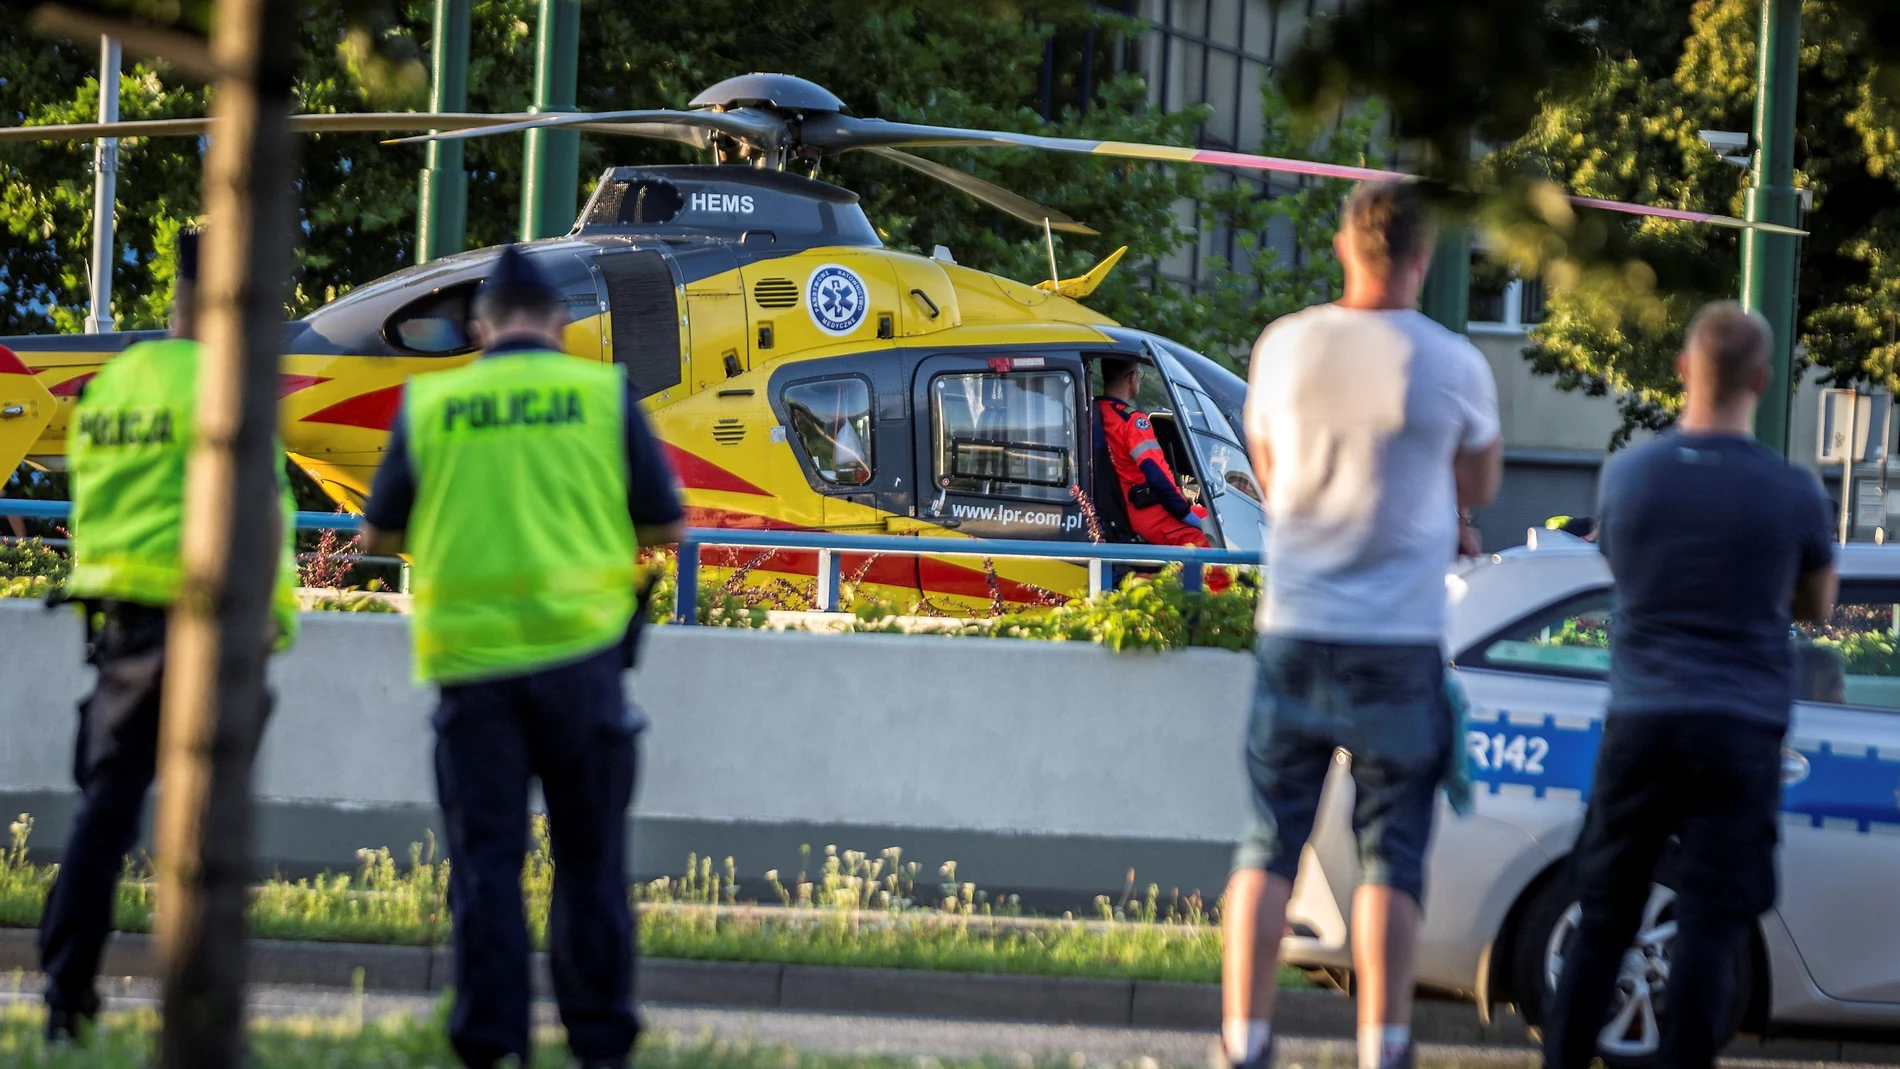 A rescue helicopter is seen on the site where Dutch cyclists Fabio Jakobsen and Dylan Groenewegen crashed in Katowice